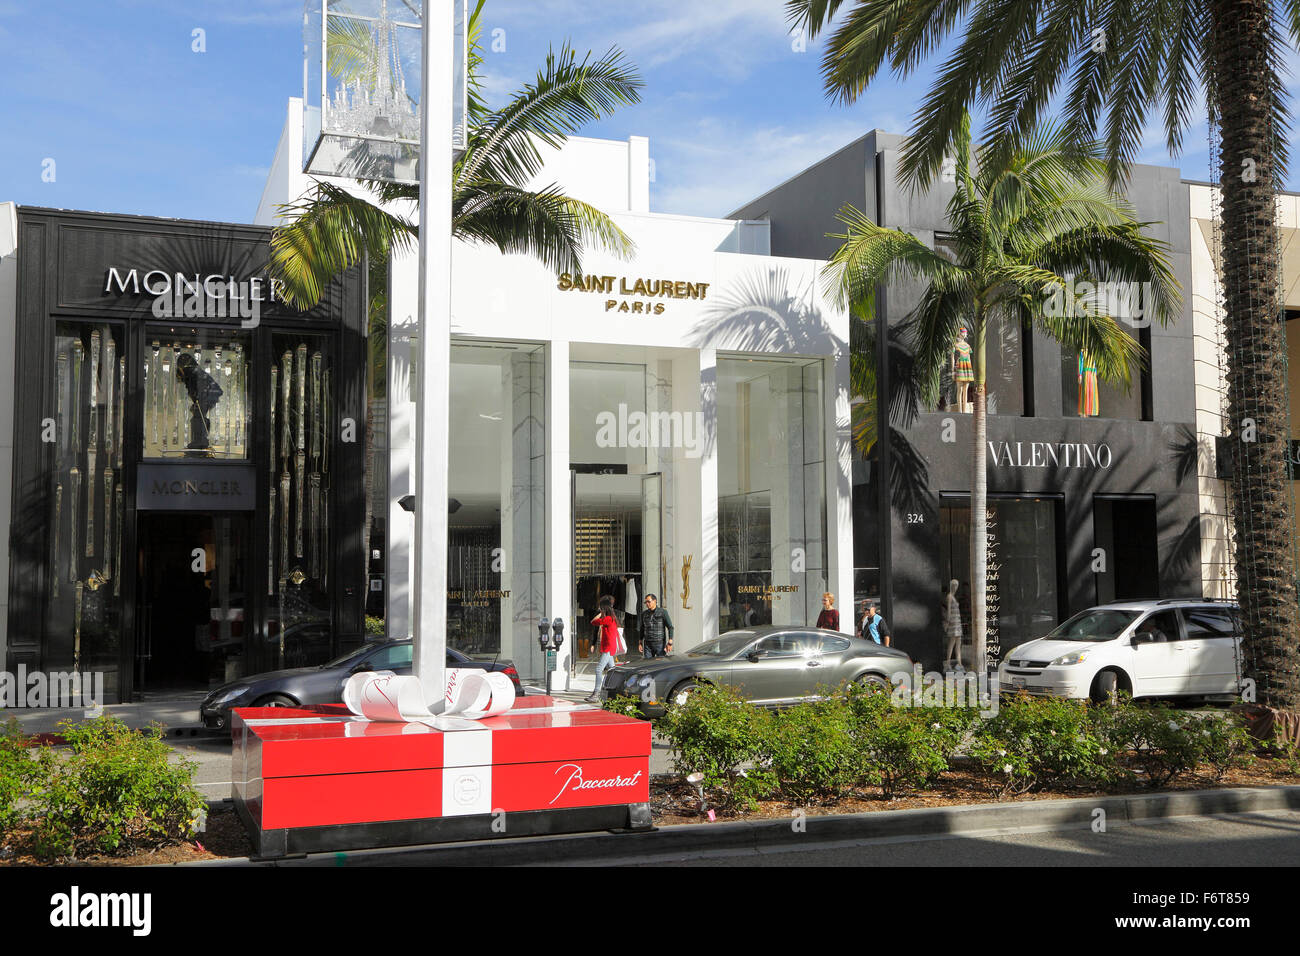 Louis Vuitton Store On Rodeo Drive Los Angeles Stock Photo - Download Image  Now - American Culture, Architecture, Beverly Hills - California - iStock